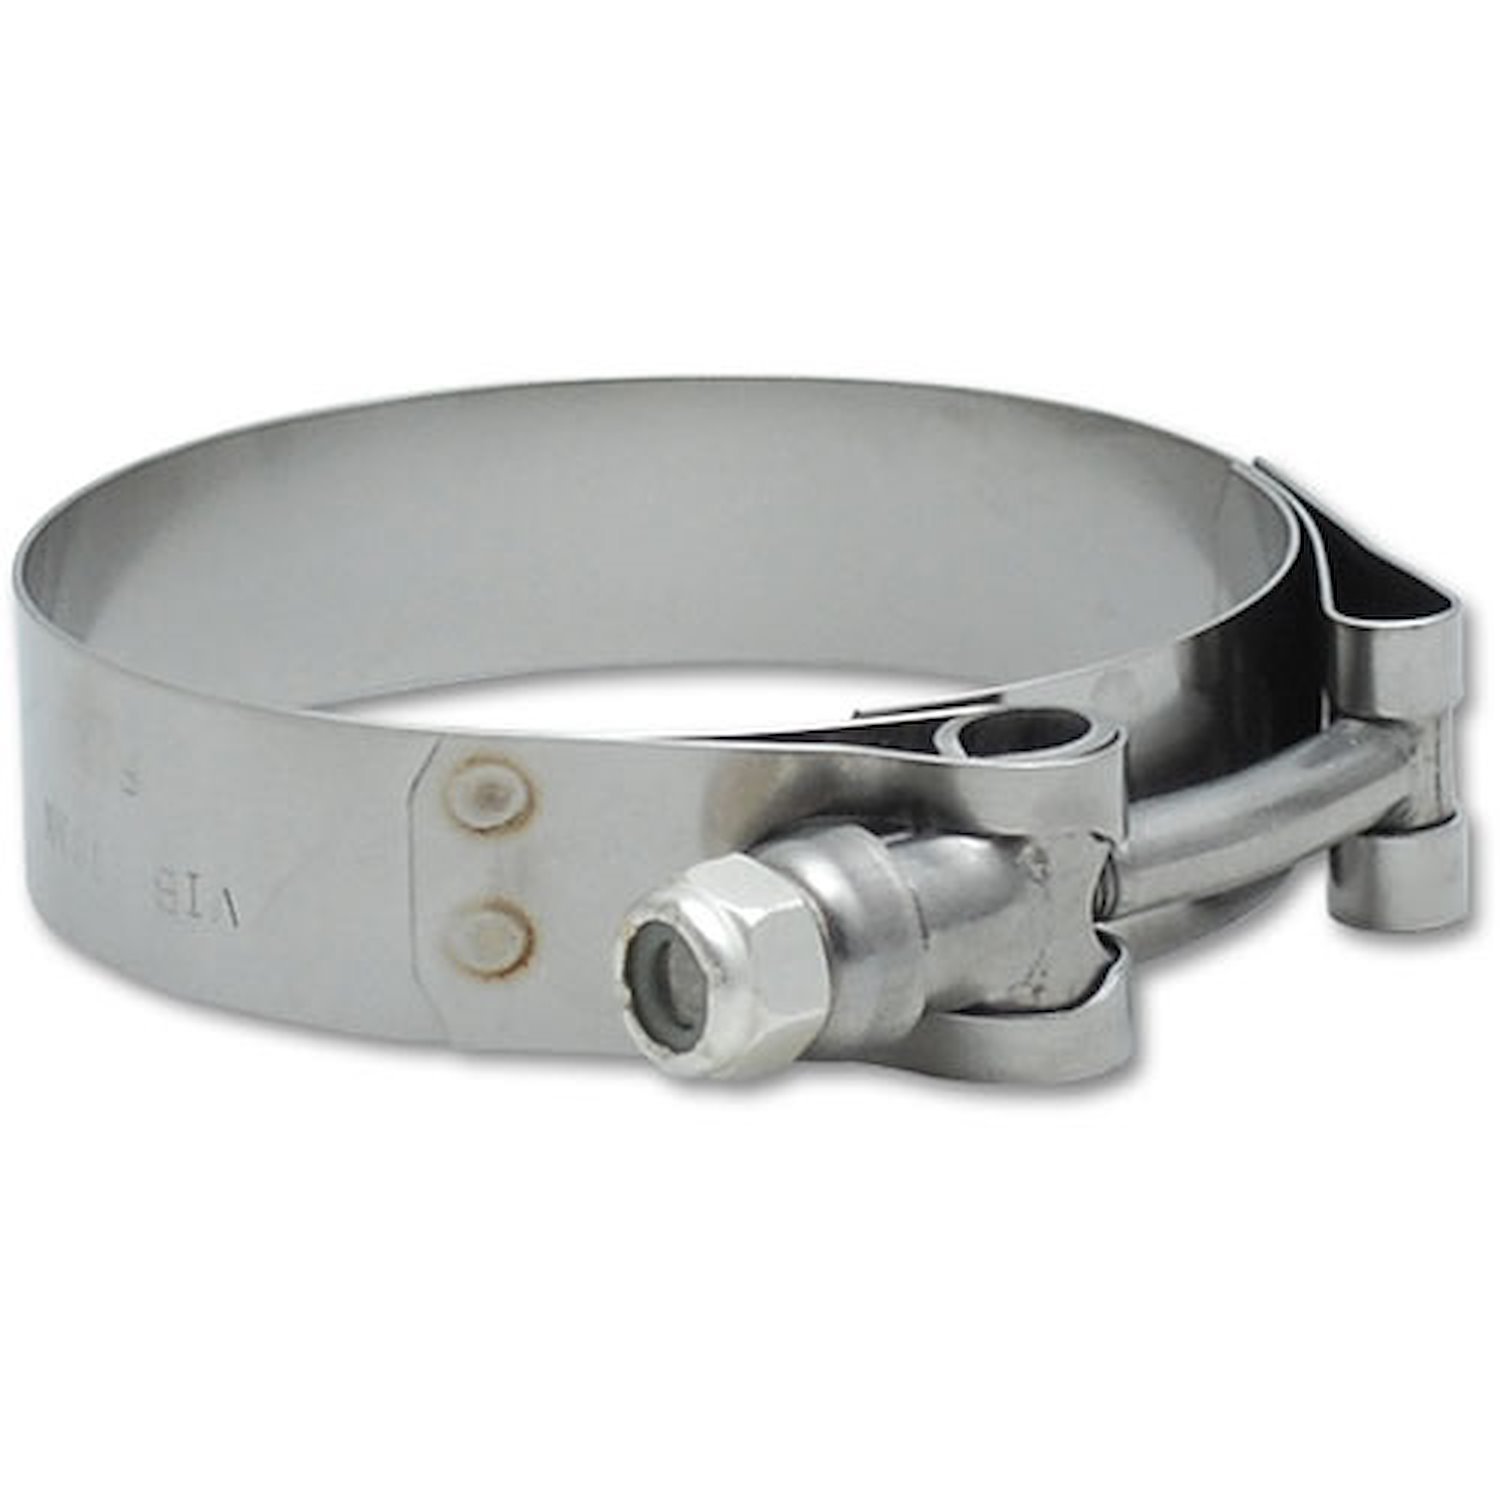 Stainless Steel T-Bolt Clamps Clamp Range 3.50" - 3.80"